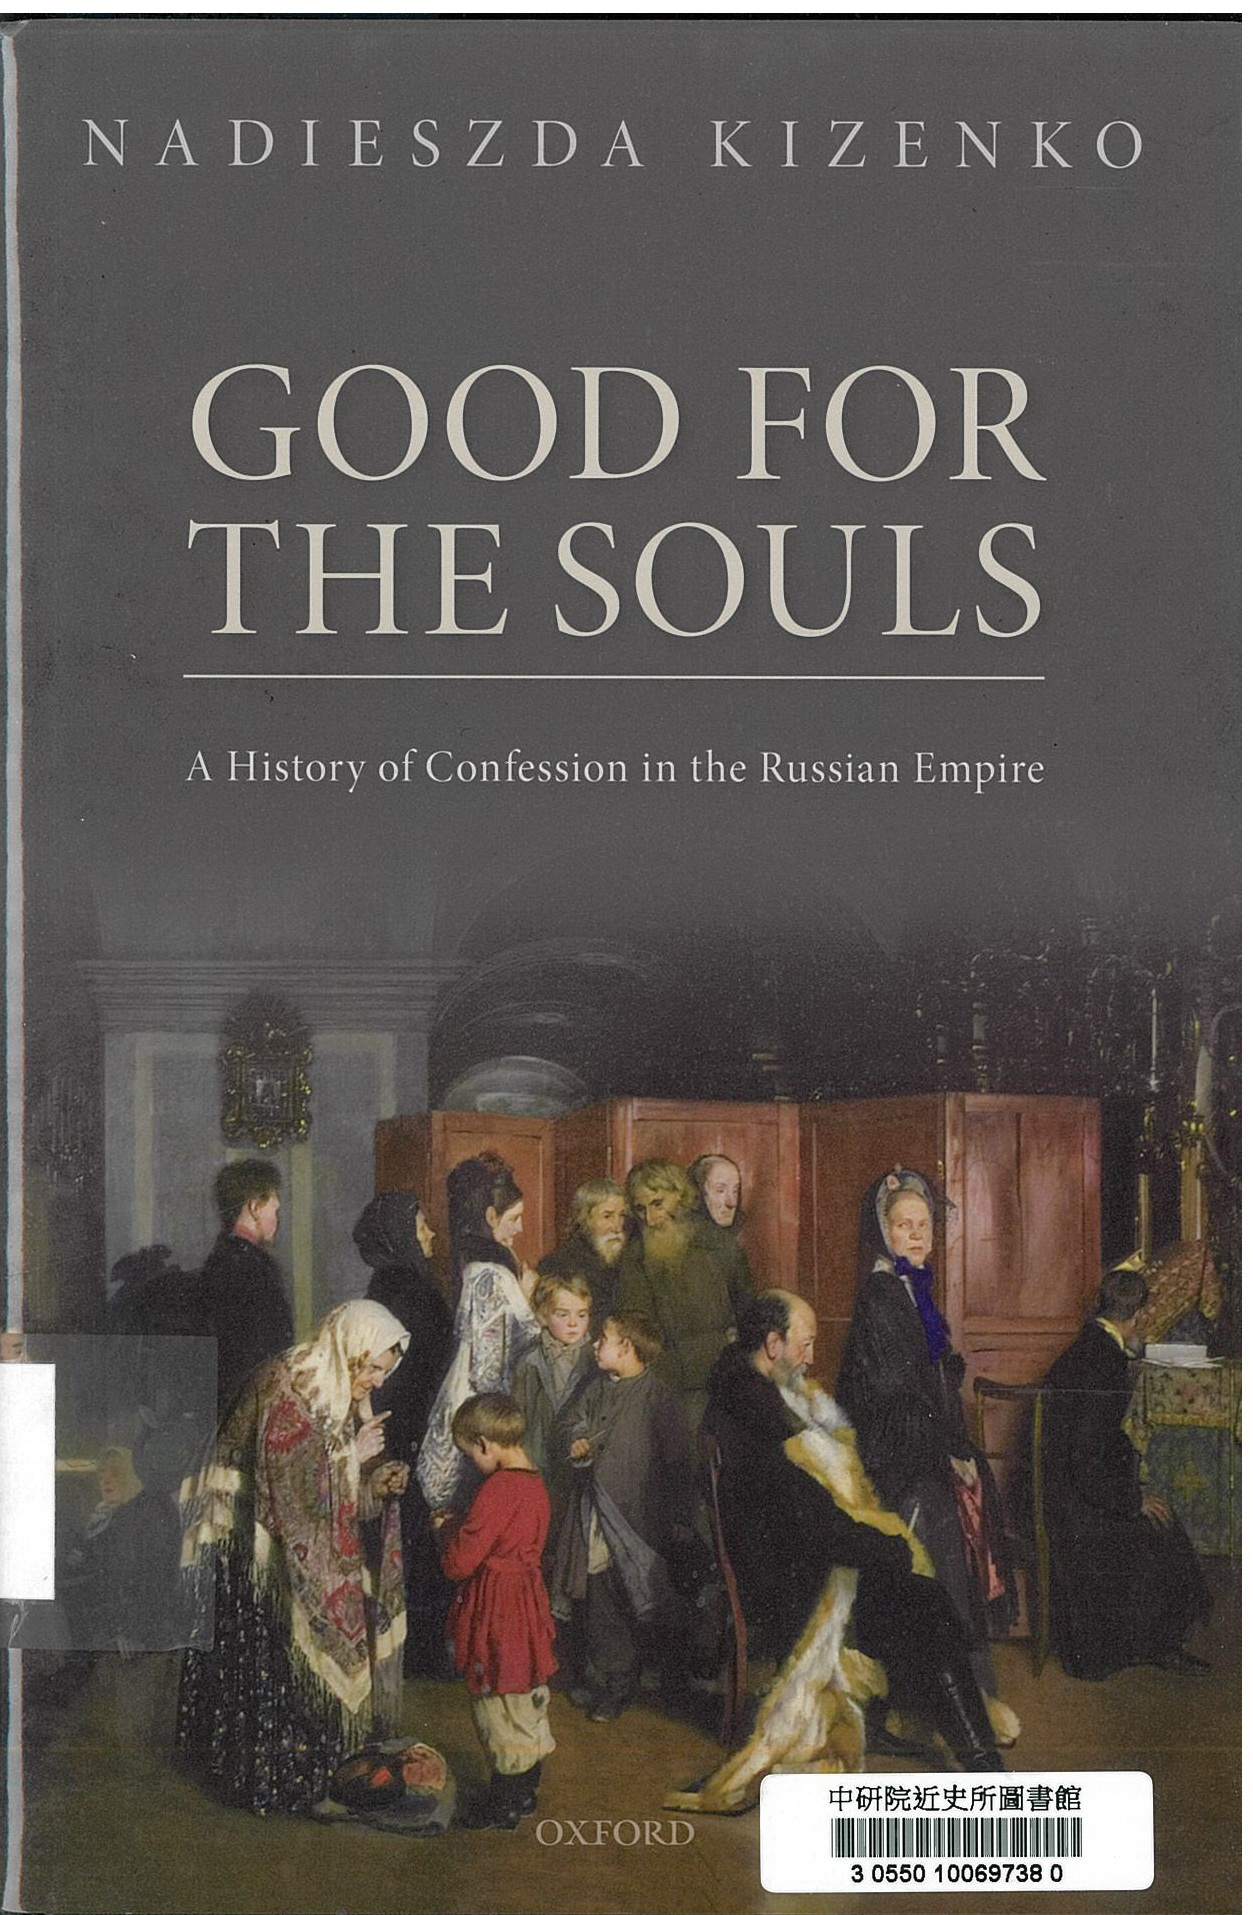 Good for the souls : a history of confession in the Russian empire